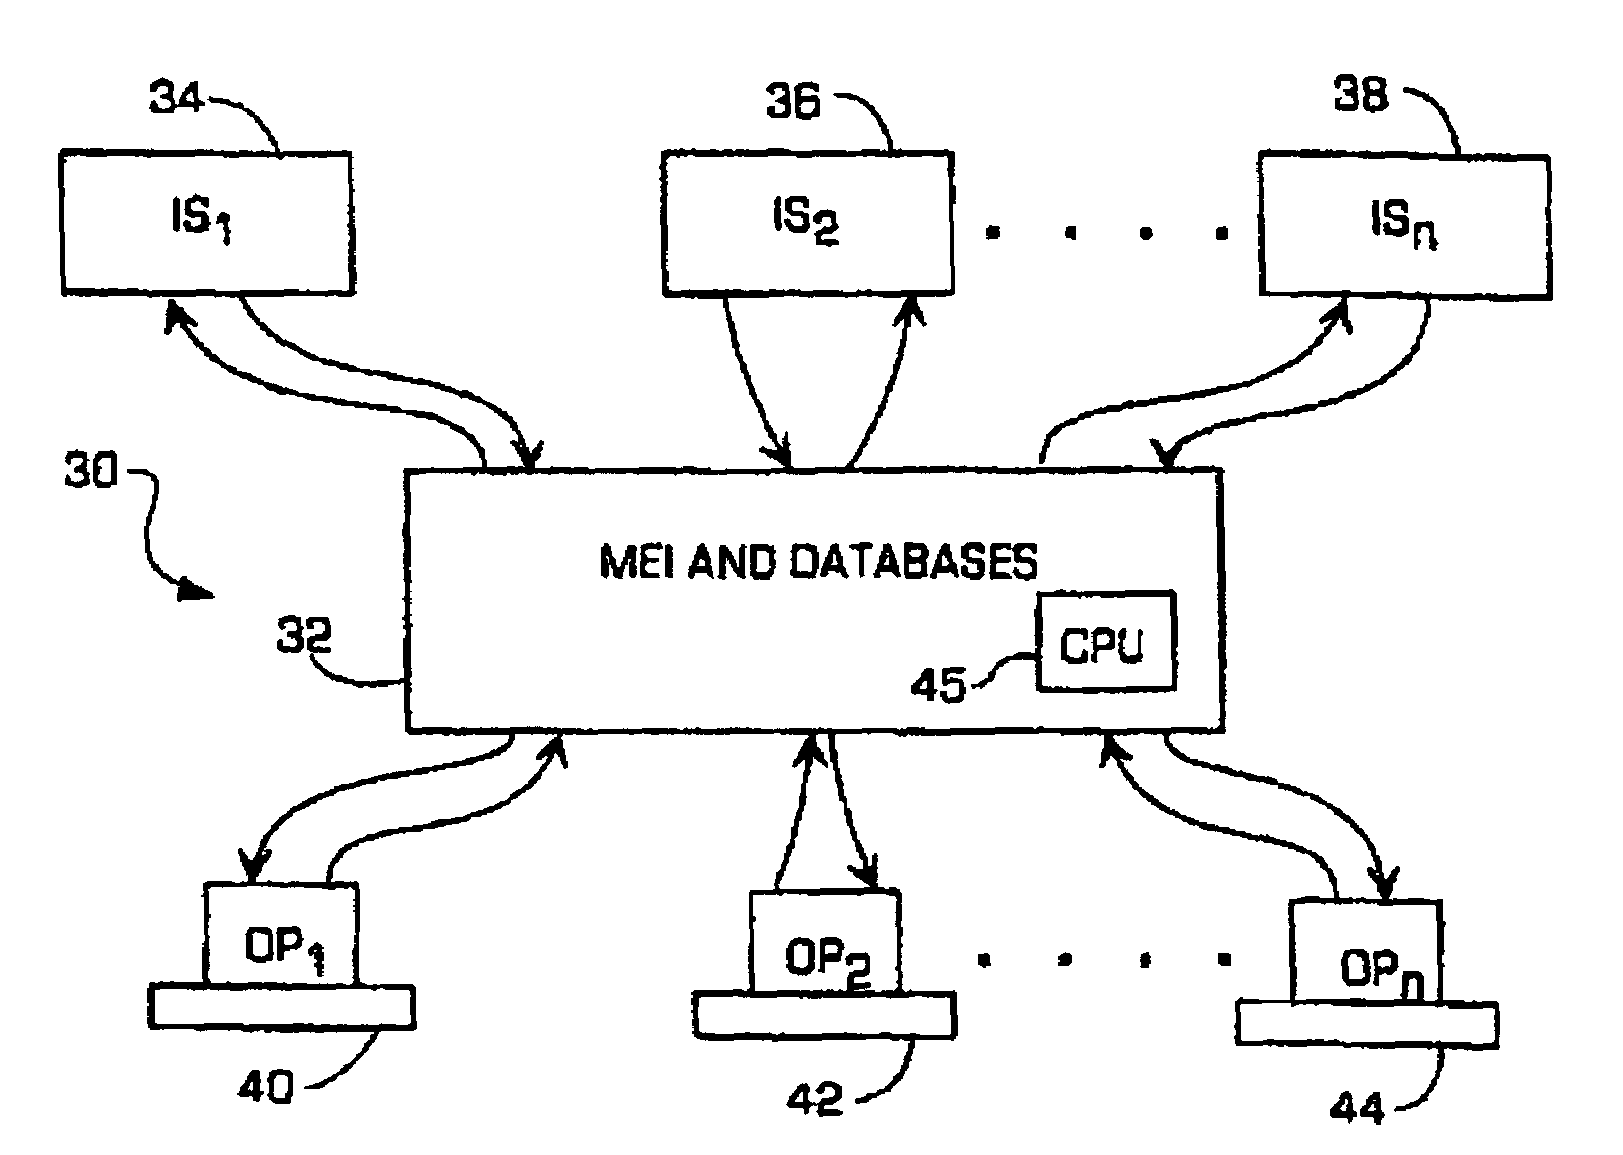 Method and system for indexing information about entities with respect to hierarchies